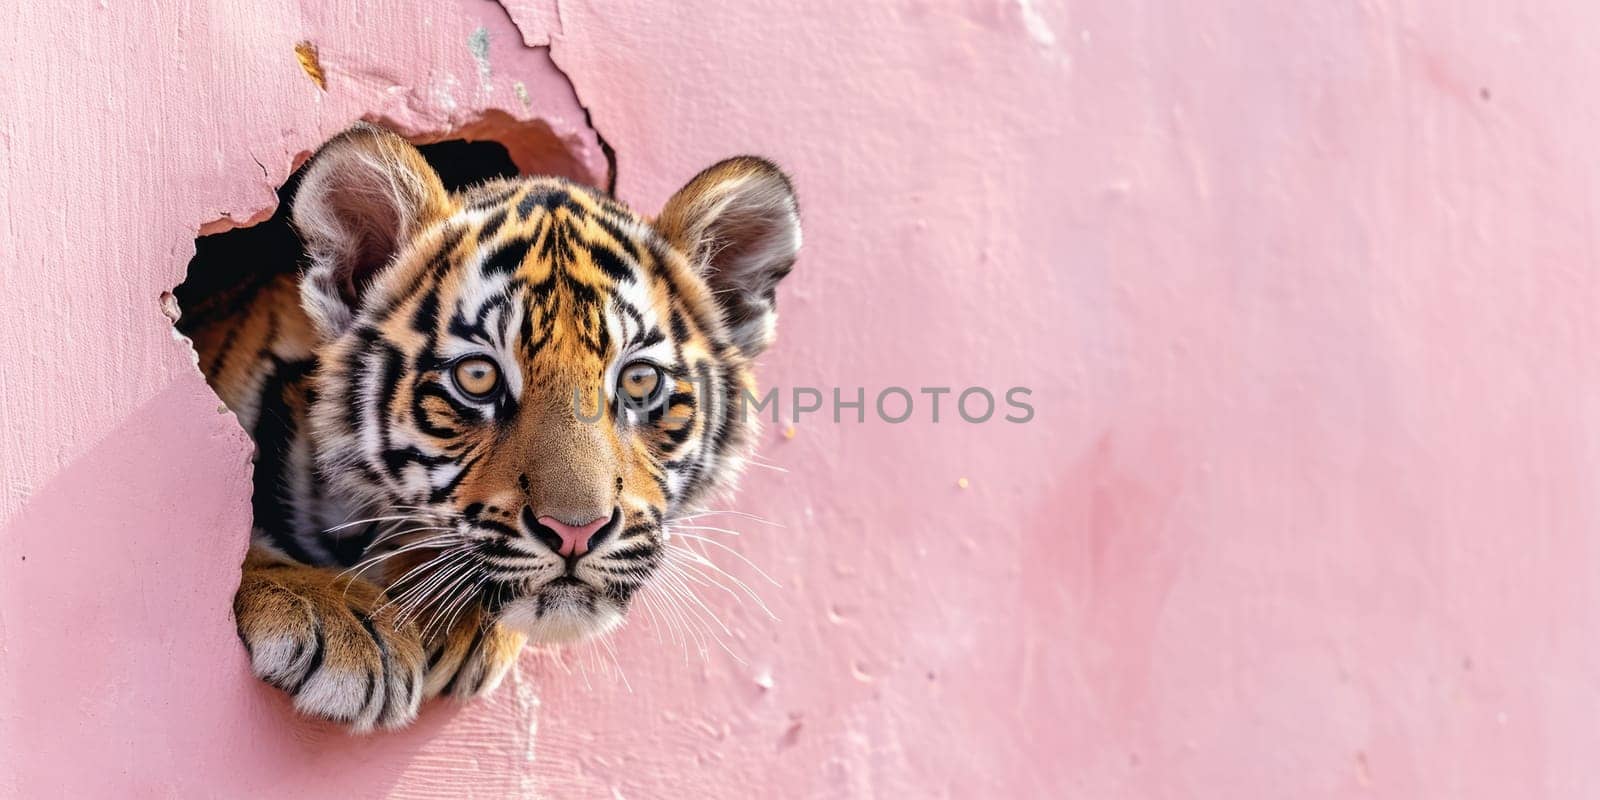 Zoom in picture of breaking pink wall and the tiger in hollow pink hole. AIGX03. by biancoblue